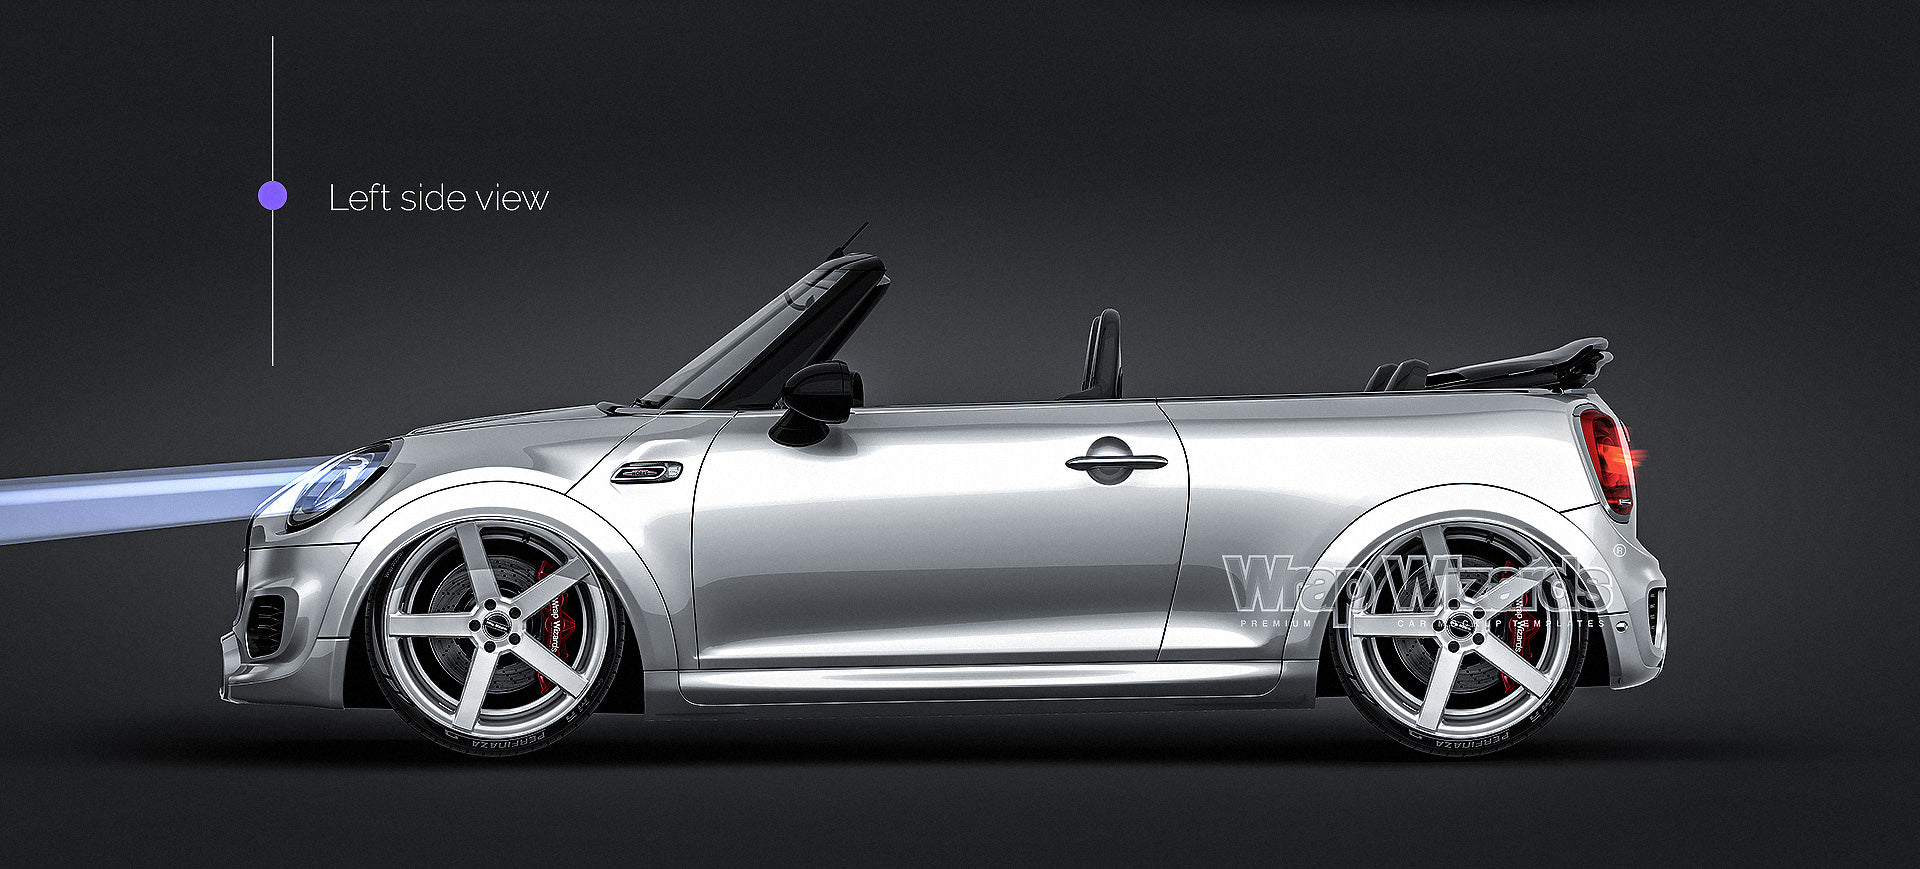 Mini Cooper S Convertible 2016 JCW John Cooper Works glossy finish - all sides Car Mockup Template.psd